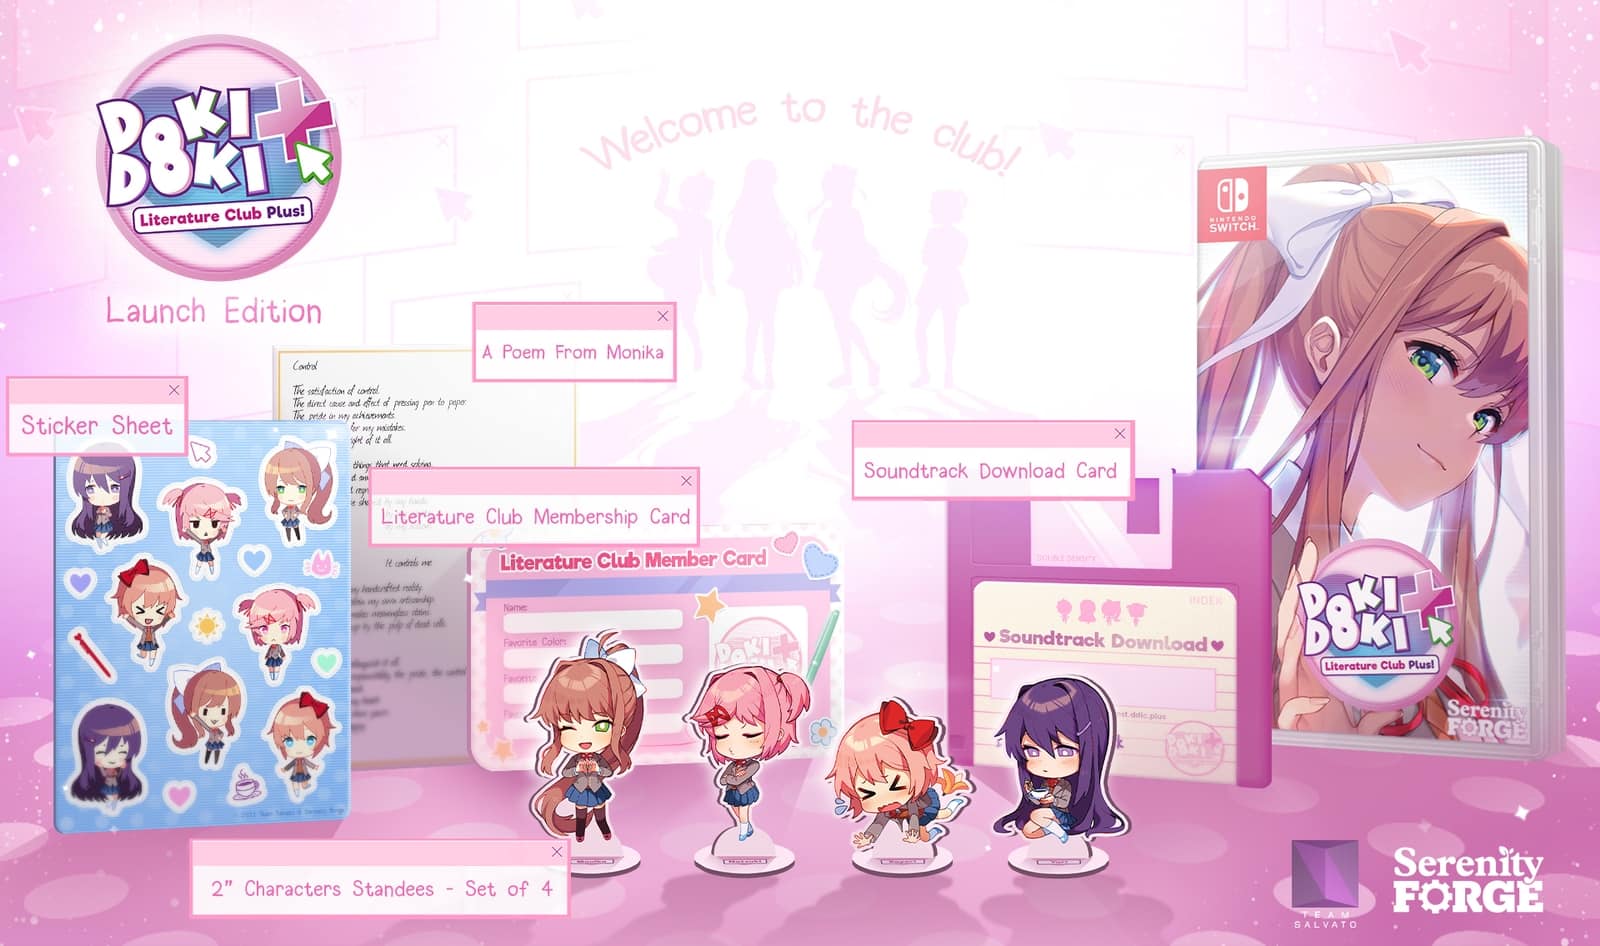 Doki Physical release